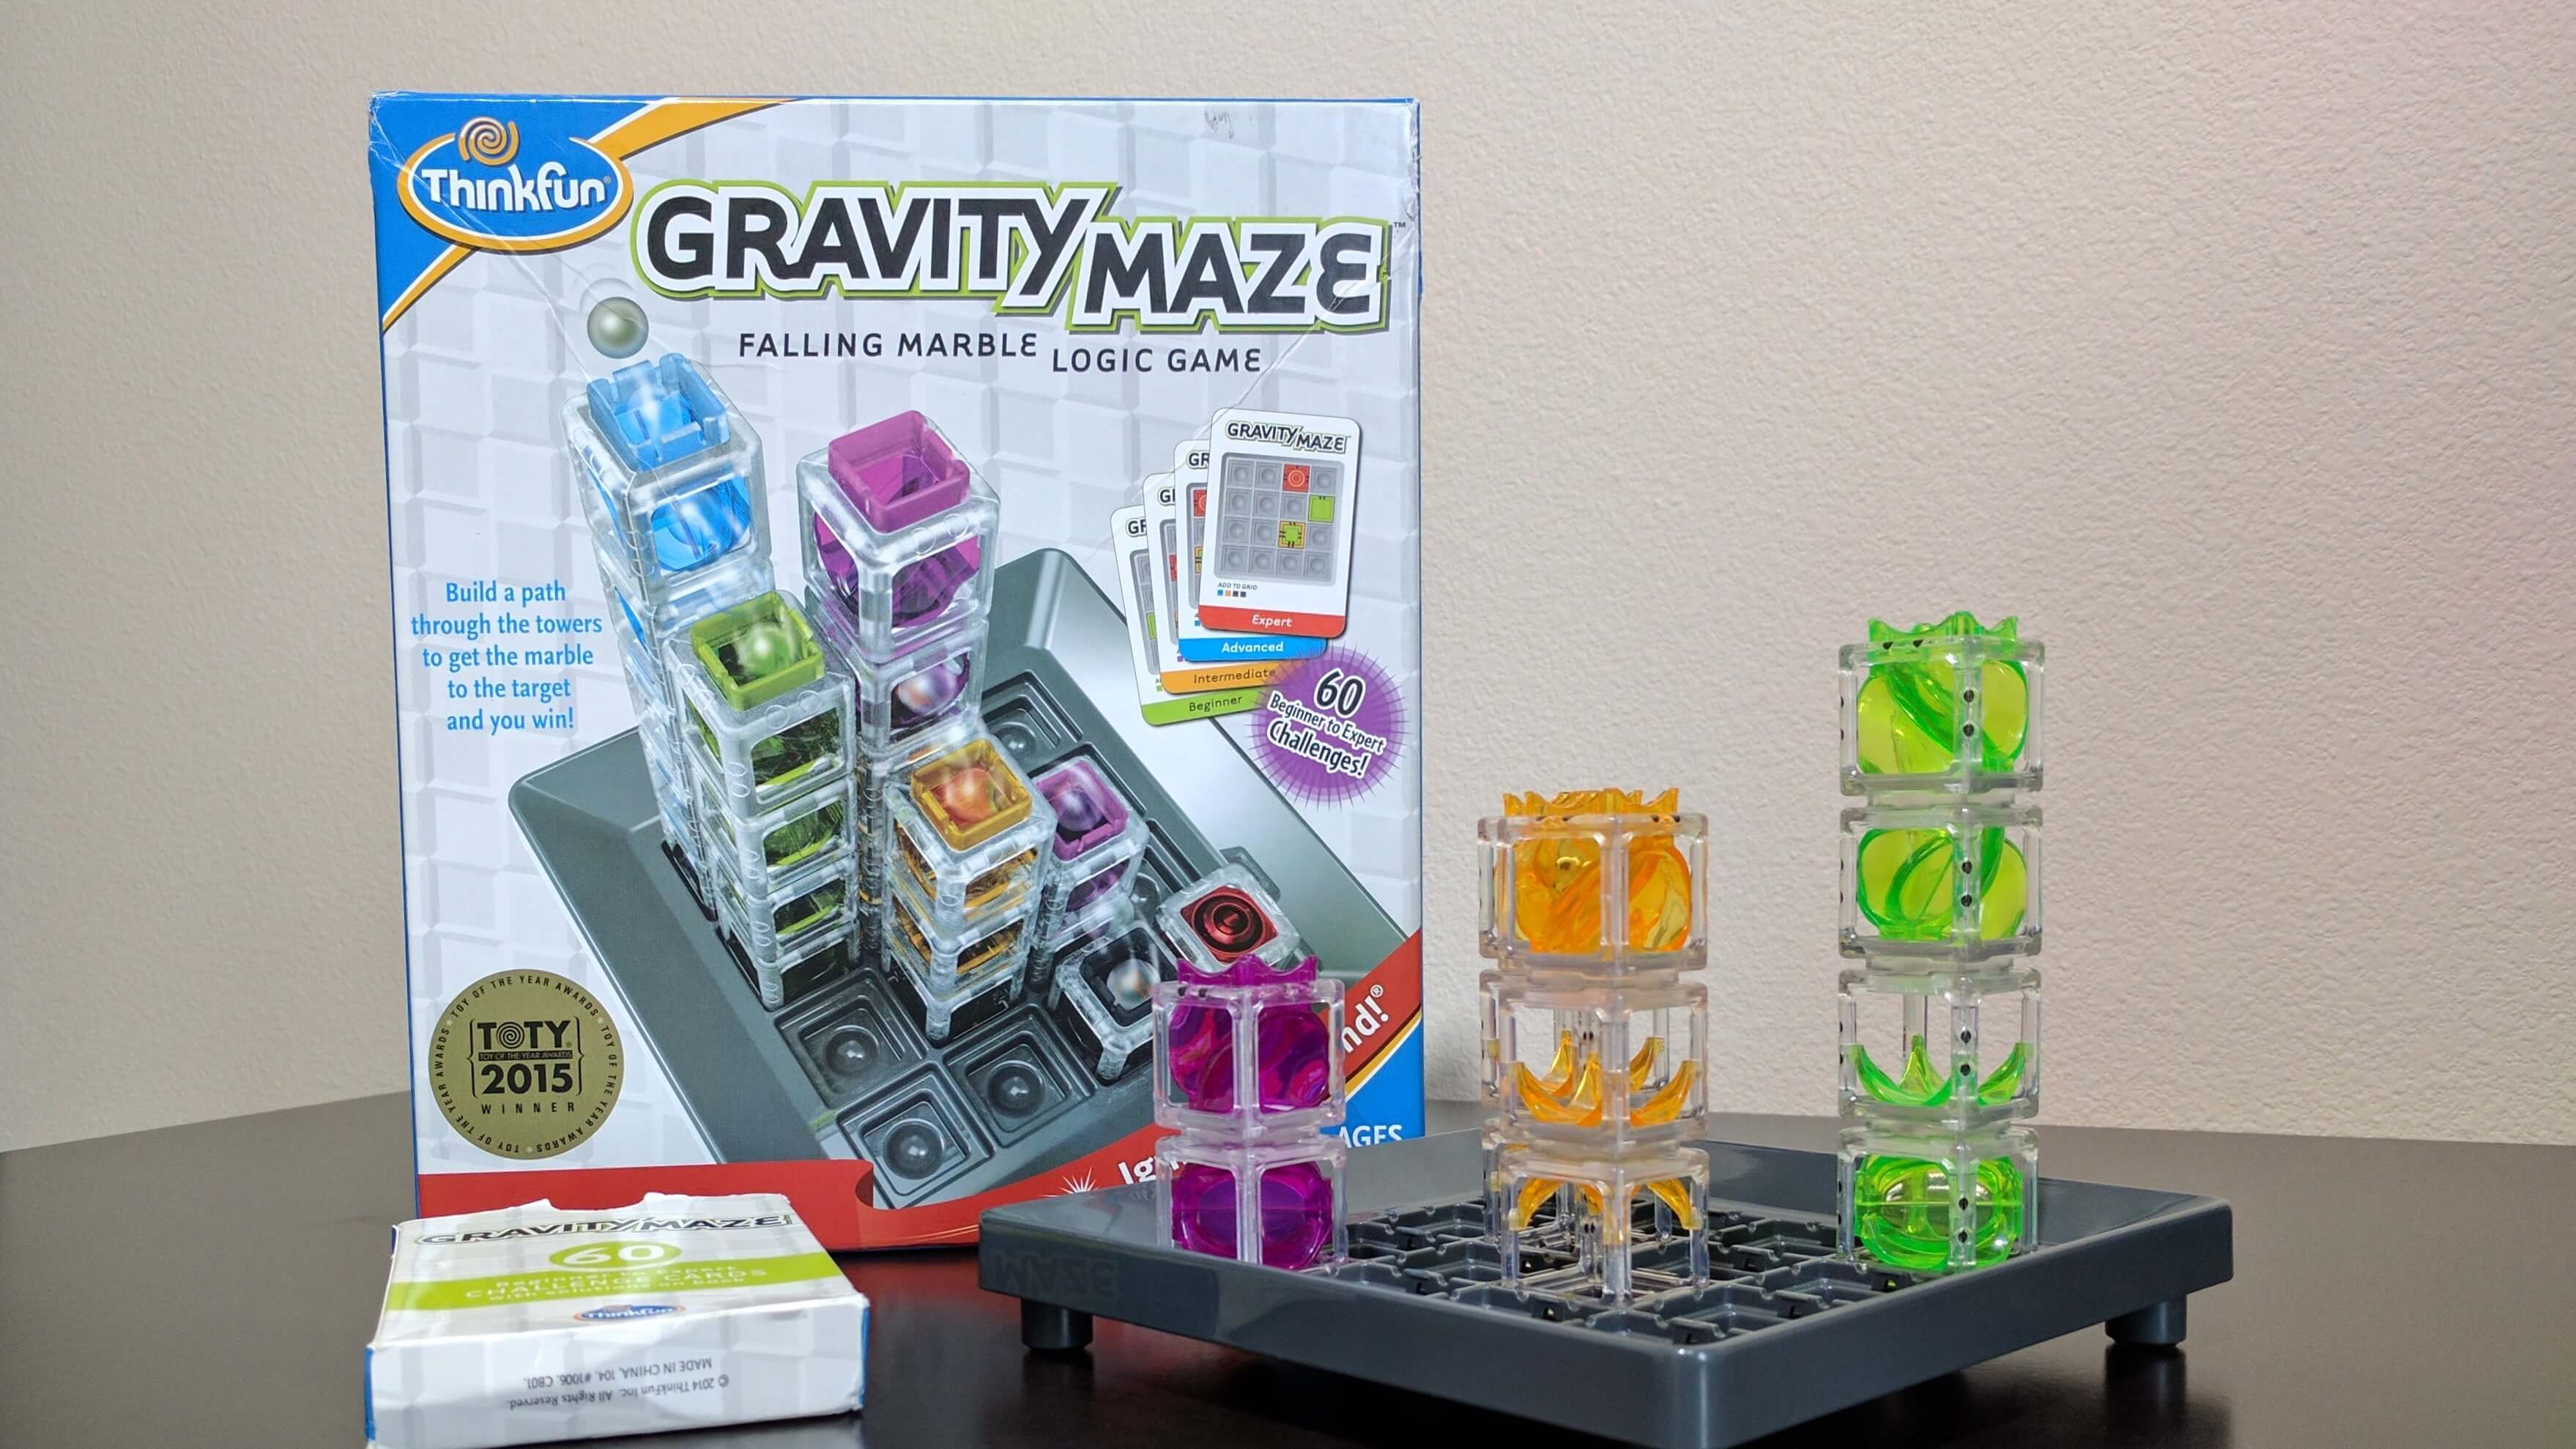 Our Heavy Review of Gravity Maze - Learn Richly